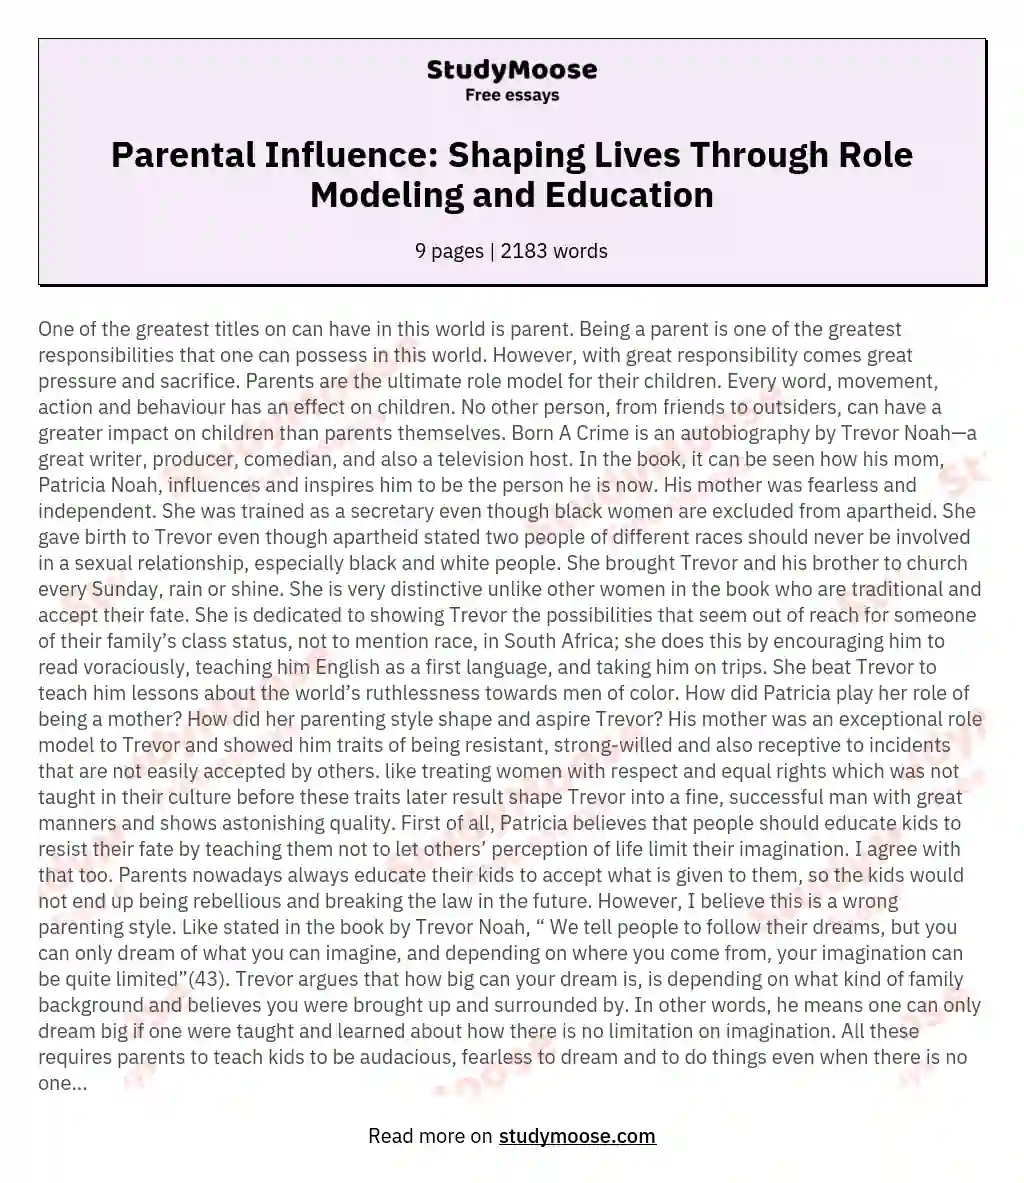 Parental Influence: Shaping Lives Through Role Modeling and Education essay